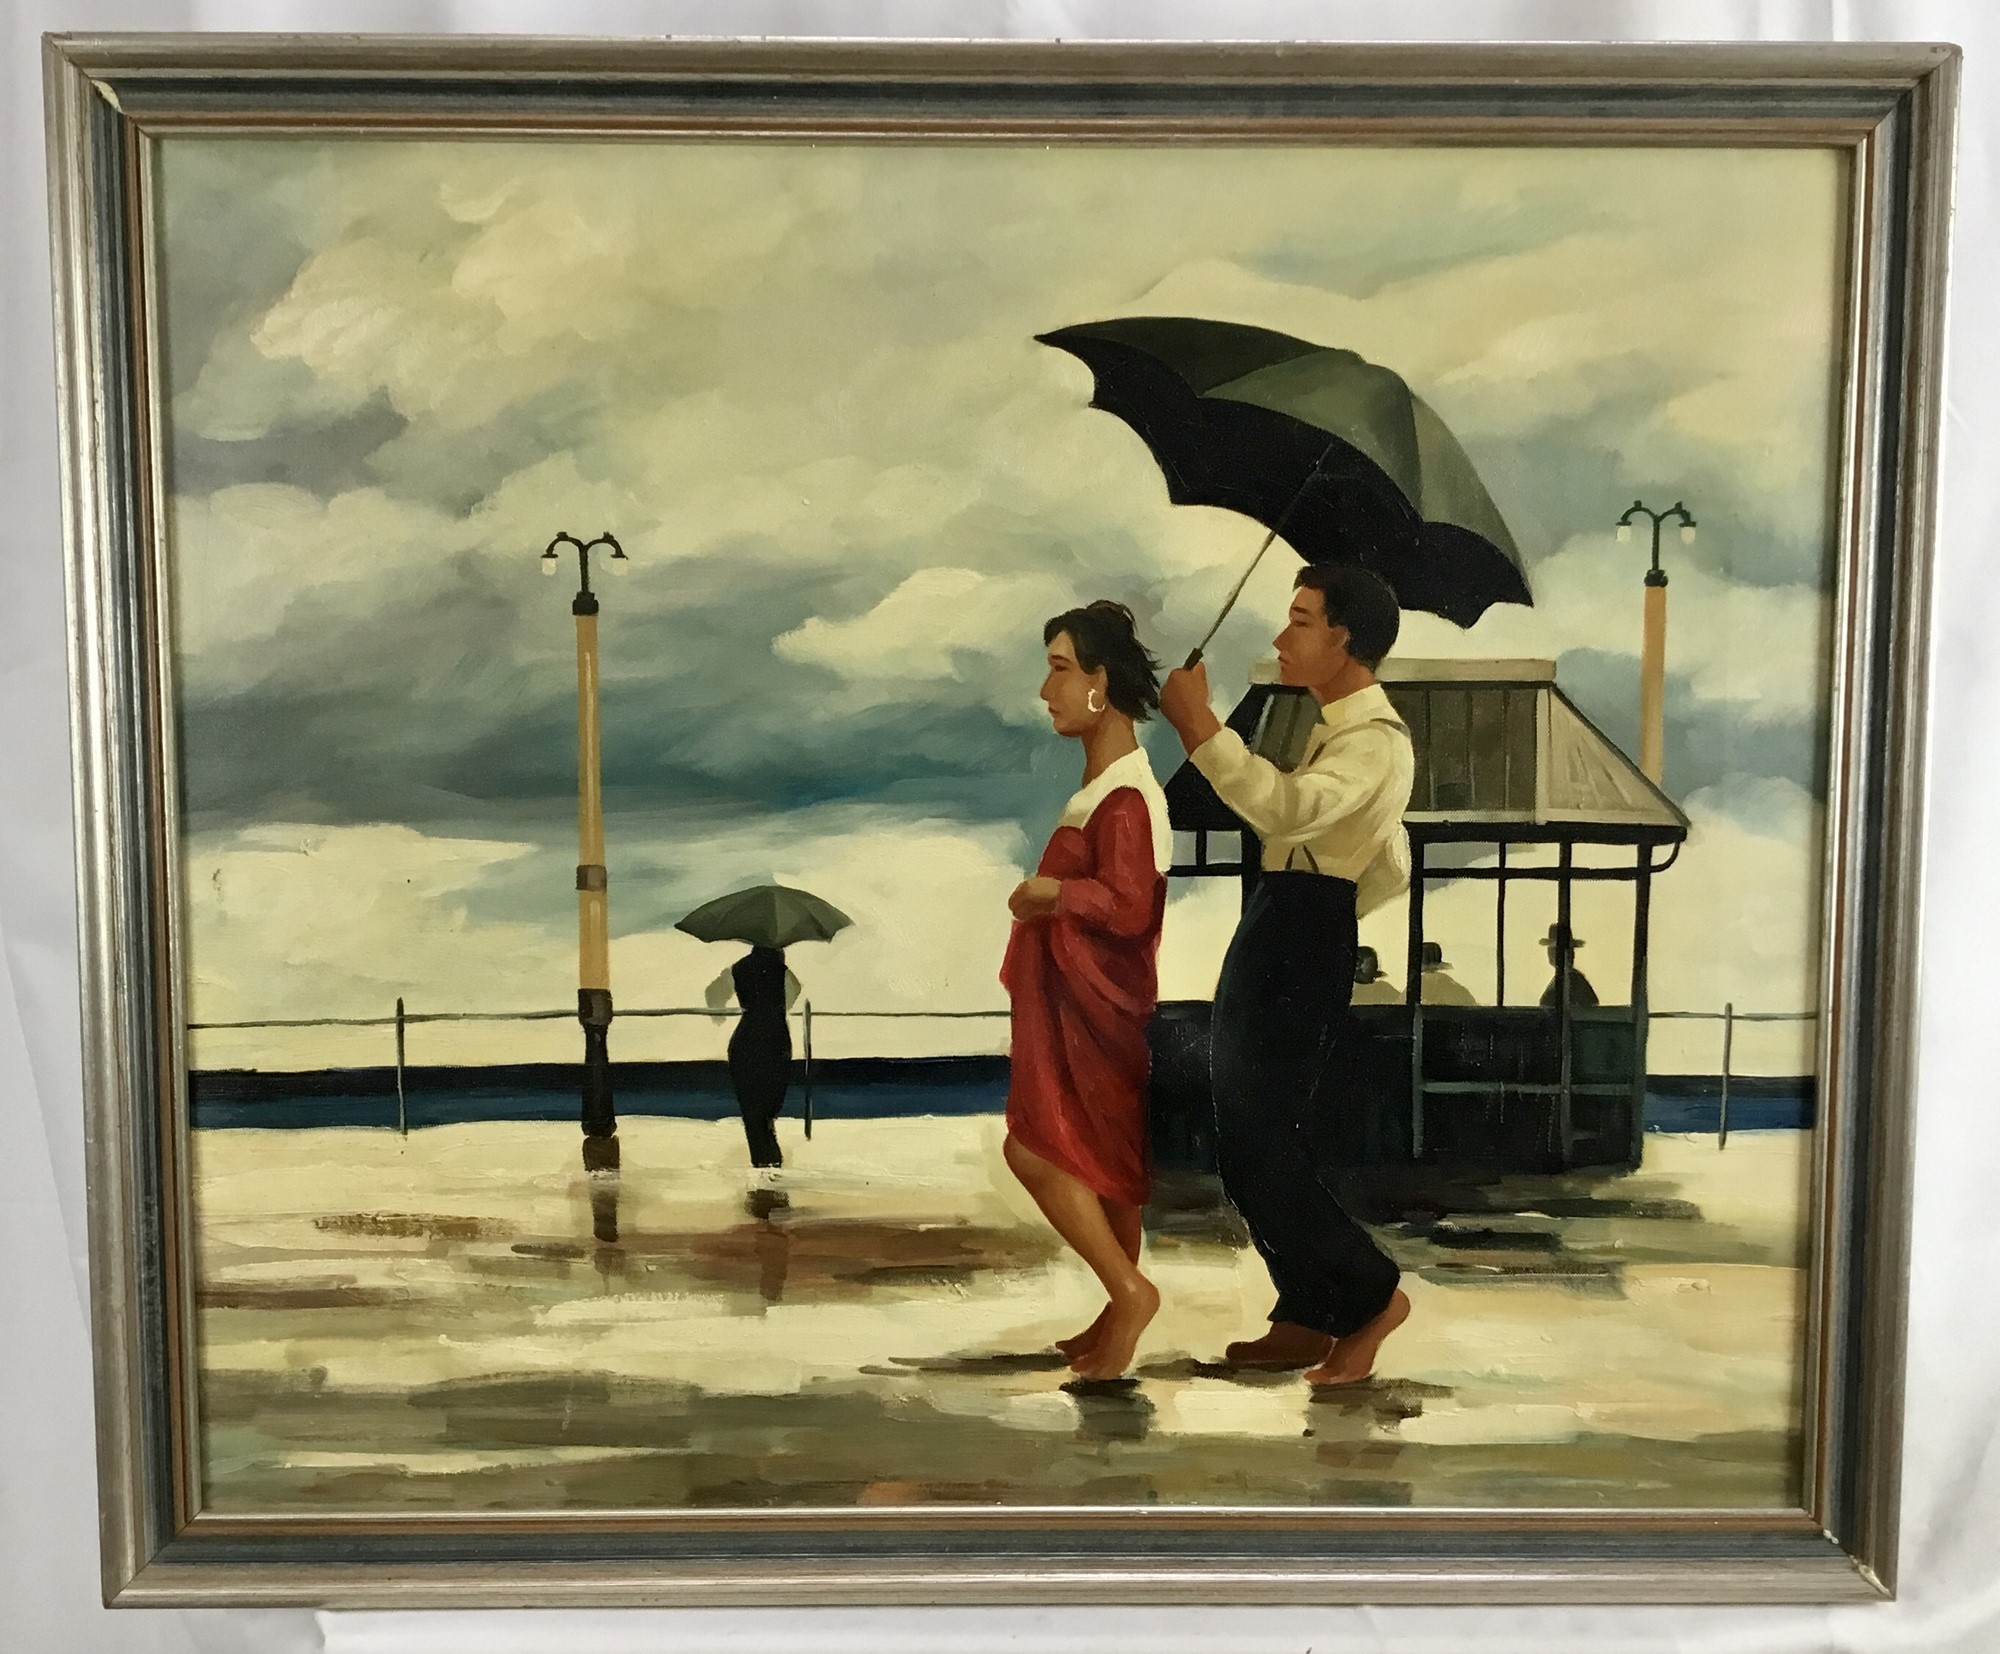 Artwork by Jack Vettriano, Figures with umbrellas on a rainy day, Made of oil on canvas